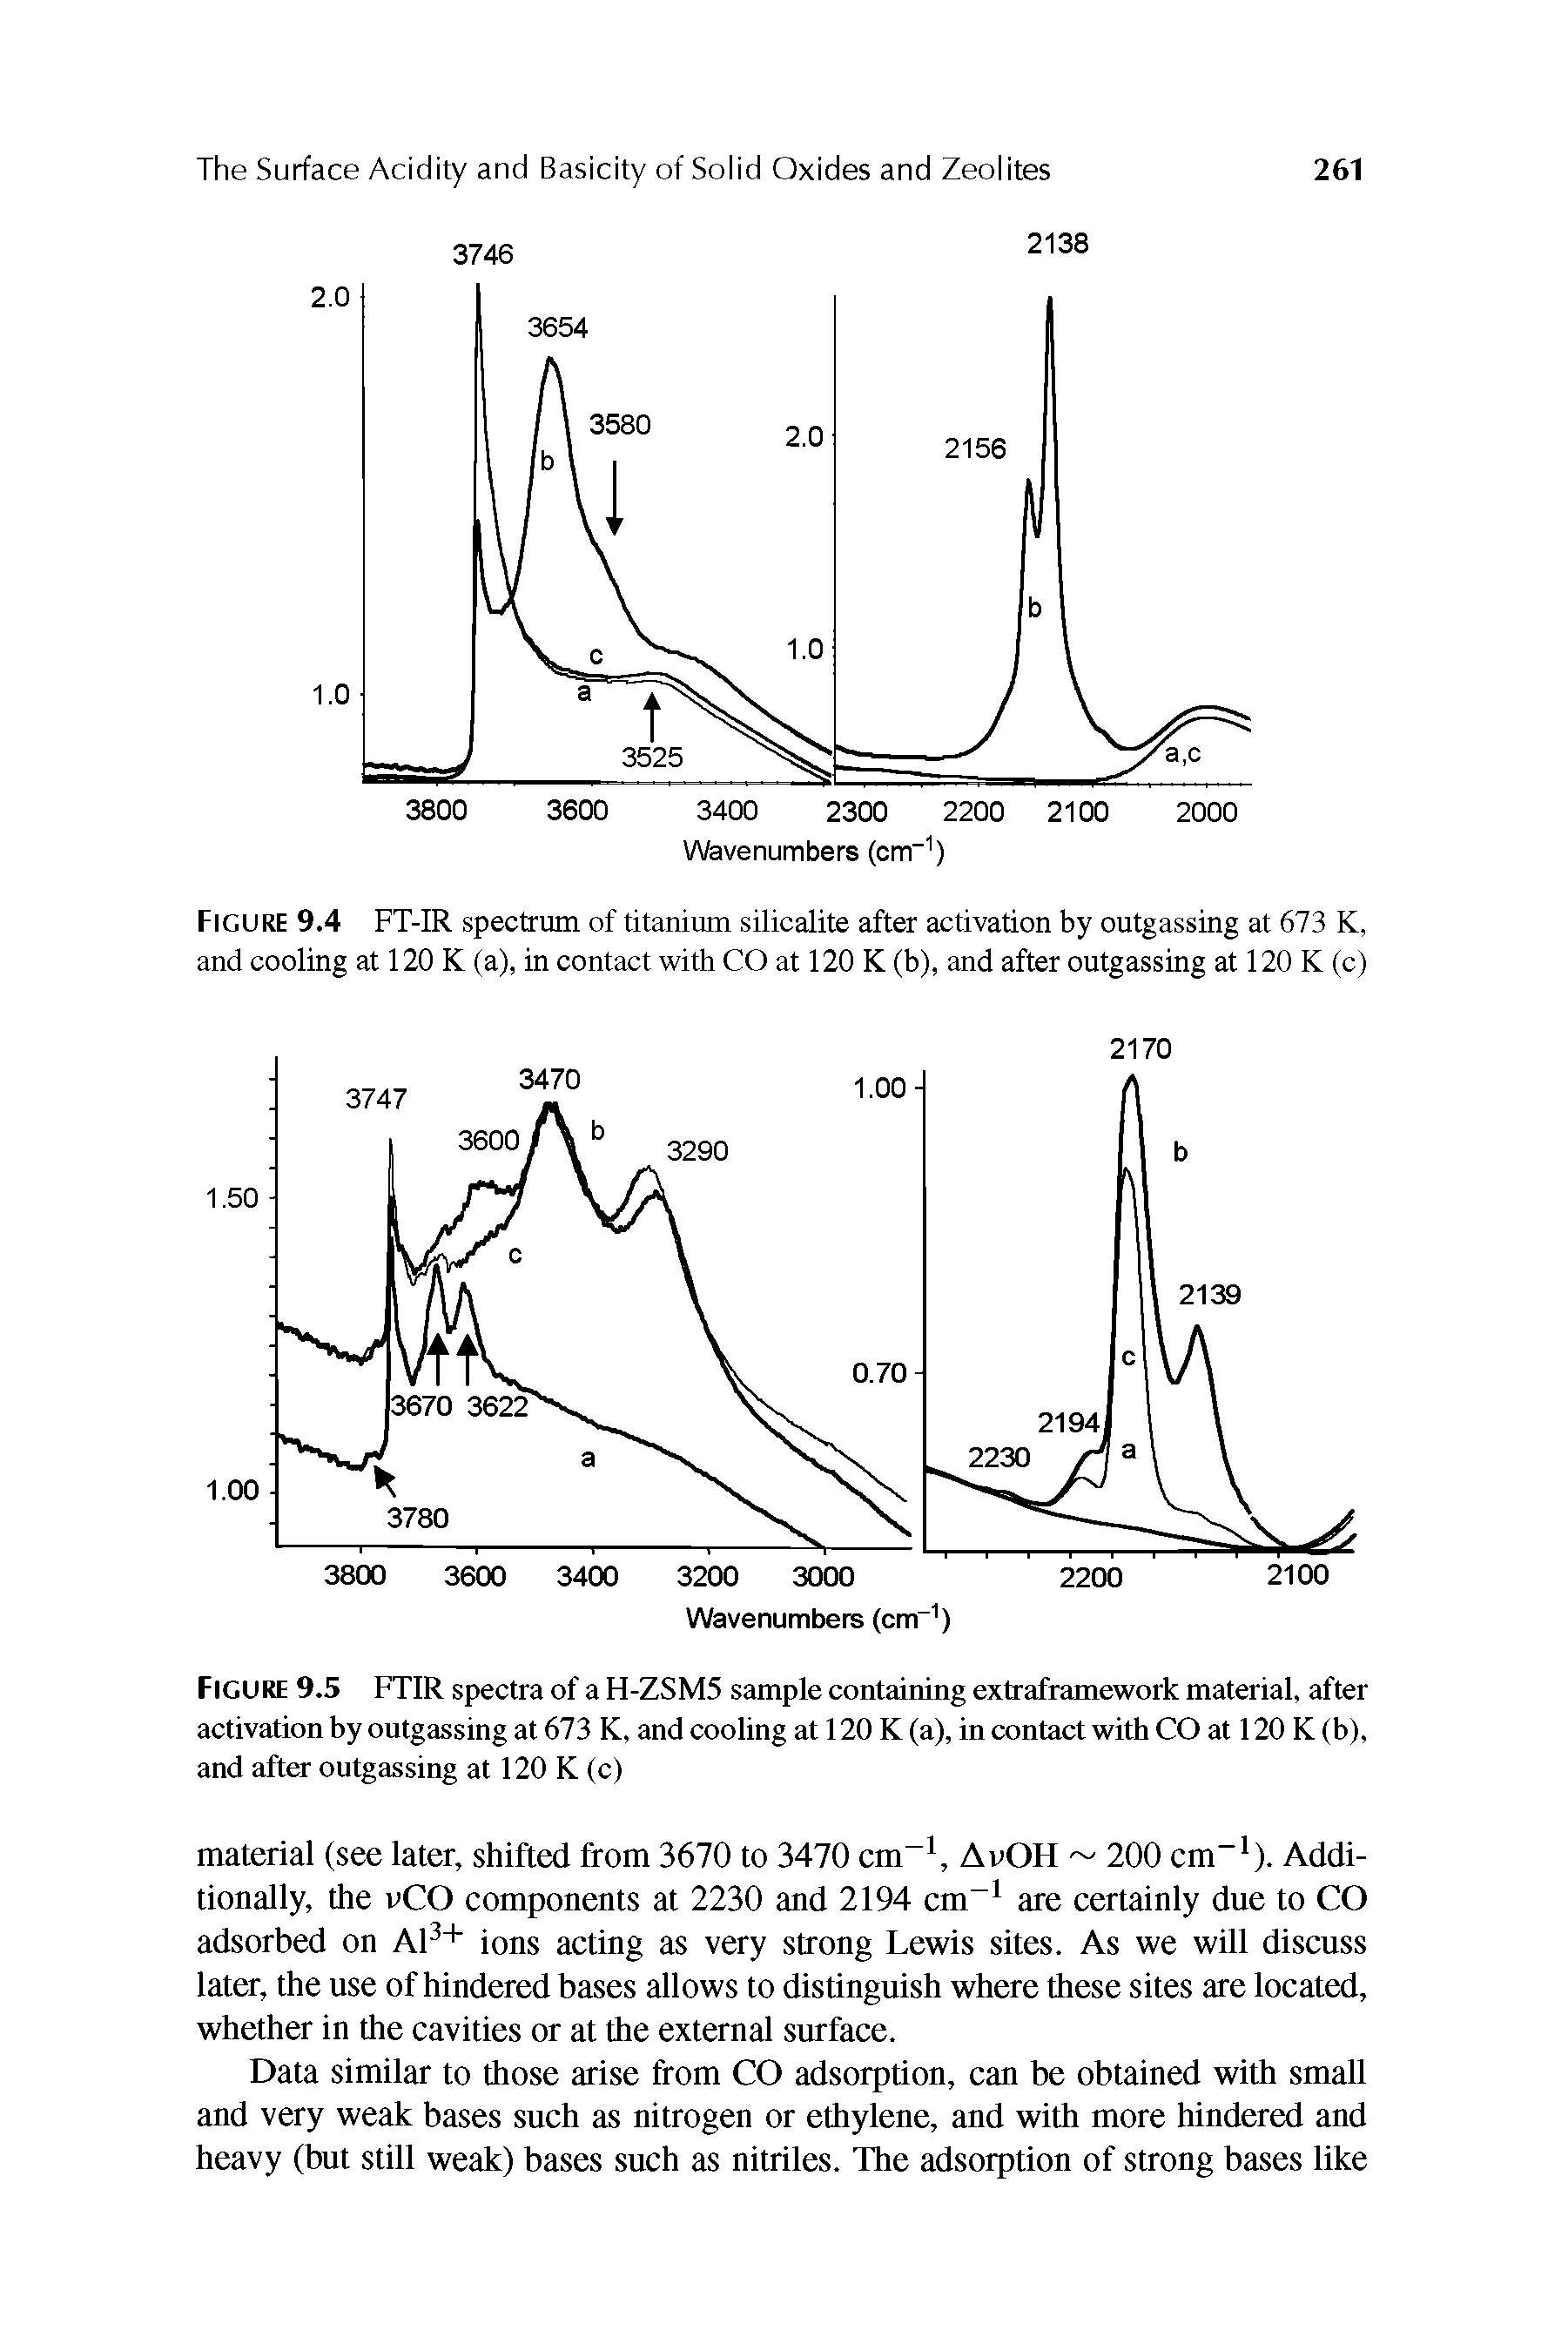 Figure 9.5 FTIR spectra of a H-ZSM5 sample containing extraframework material, after activation by outgassing at 673 K, and cooling at 120 K (a), in contact with CO at 120 K (b), and after outgassing at 120 K (c)...